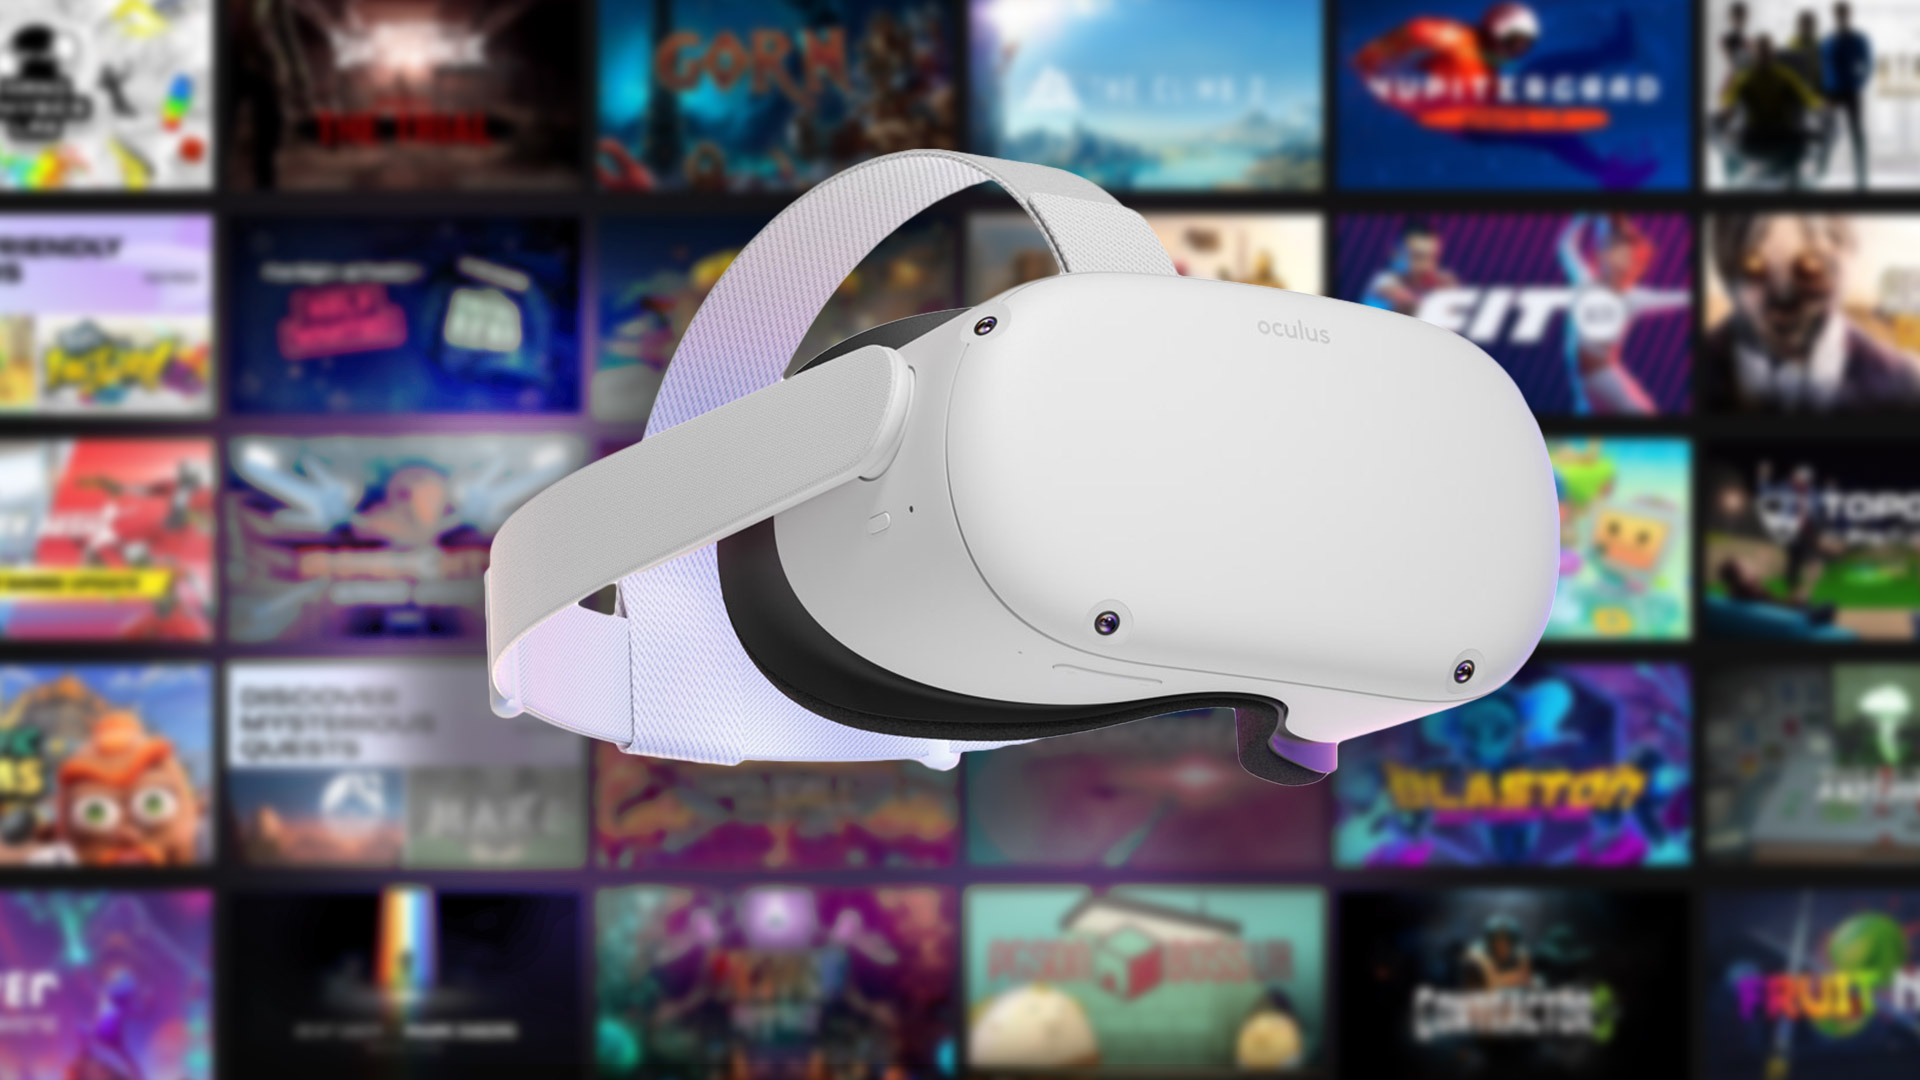 Top 20 Best Oculus Quest 2 Games & Apps – May 2022